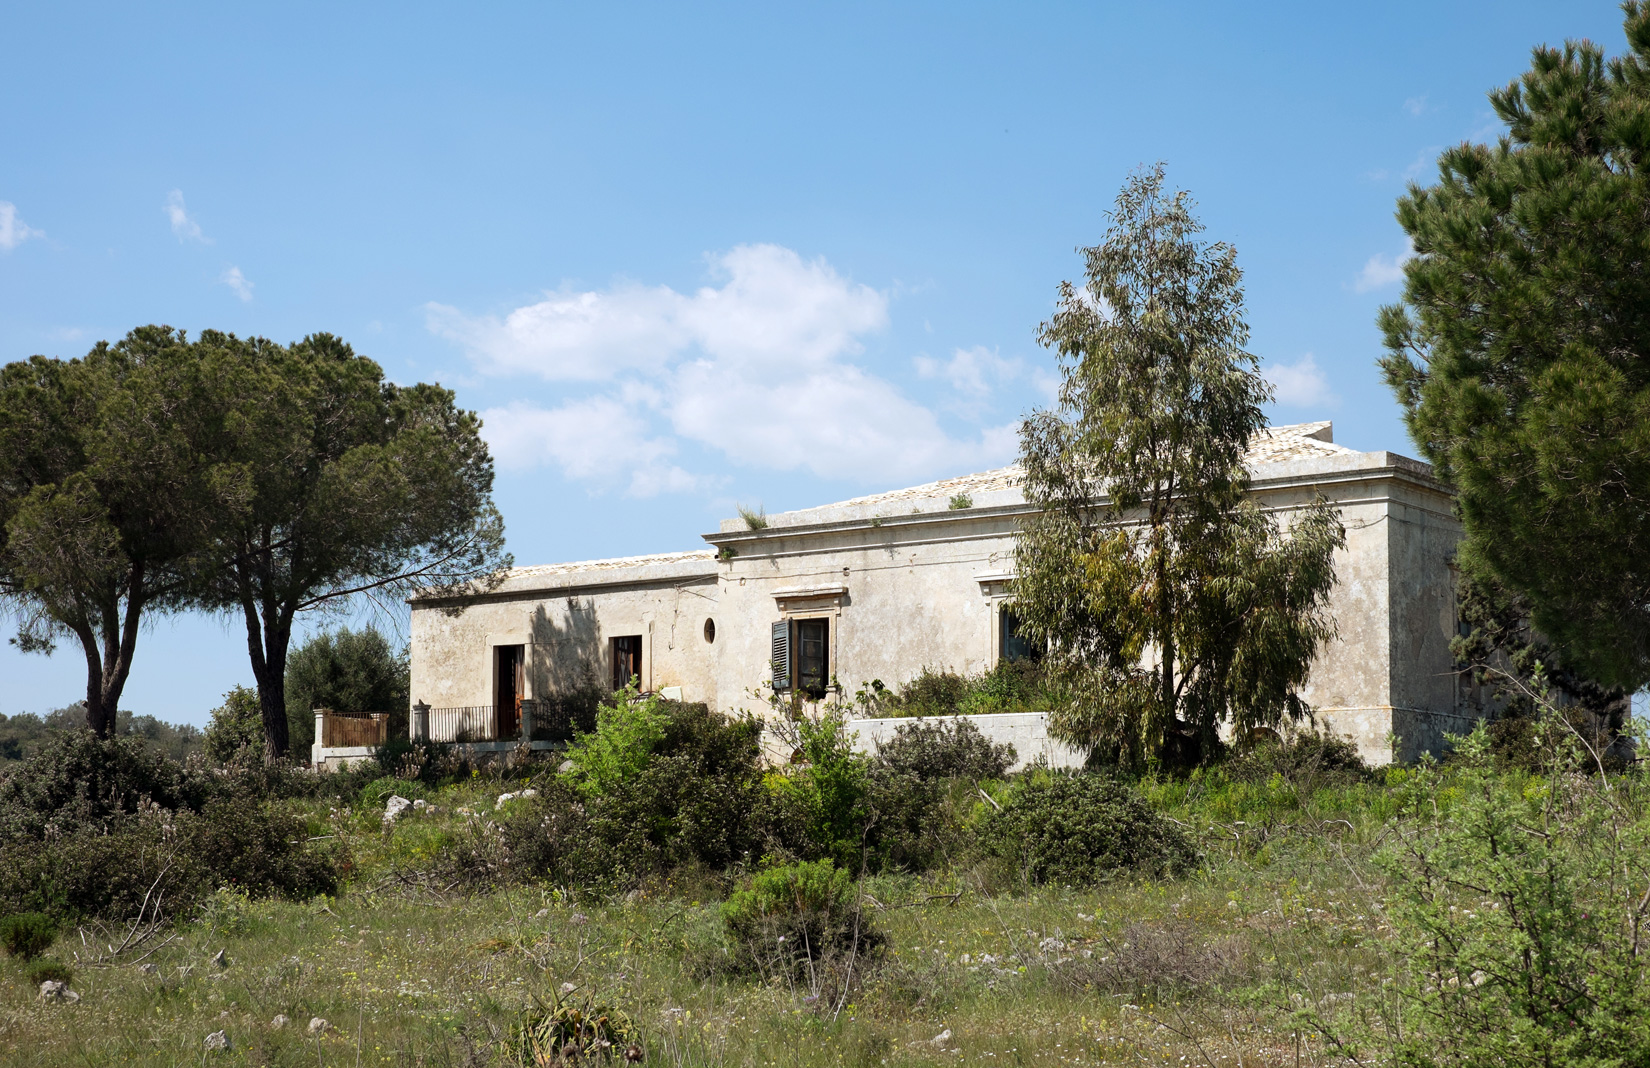 Gorgeous Sicilian estate in need of TLC lists for €850k